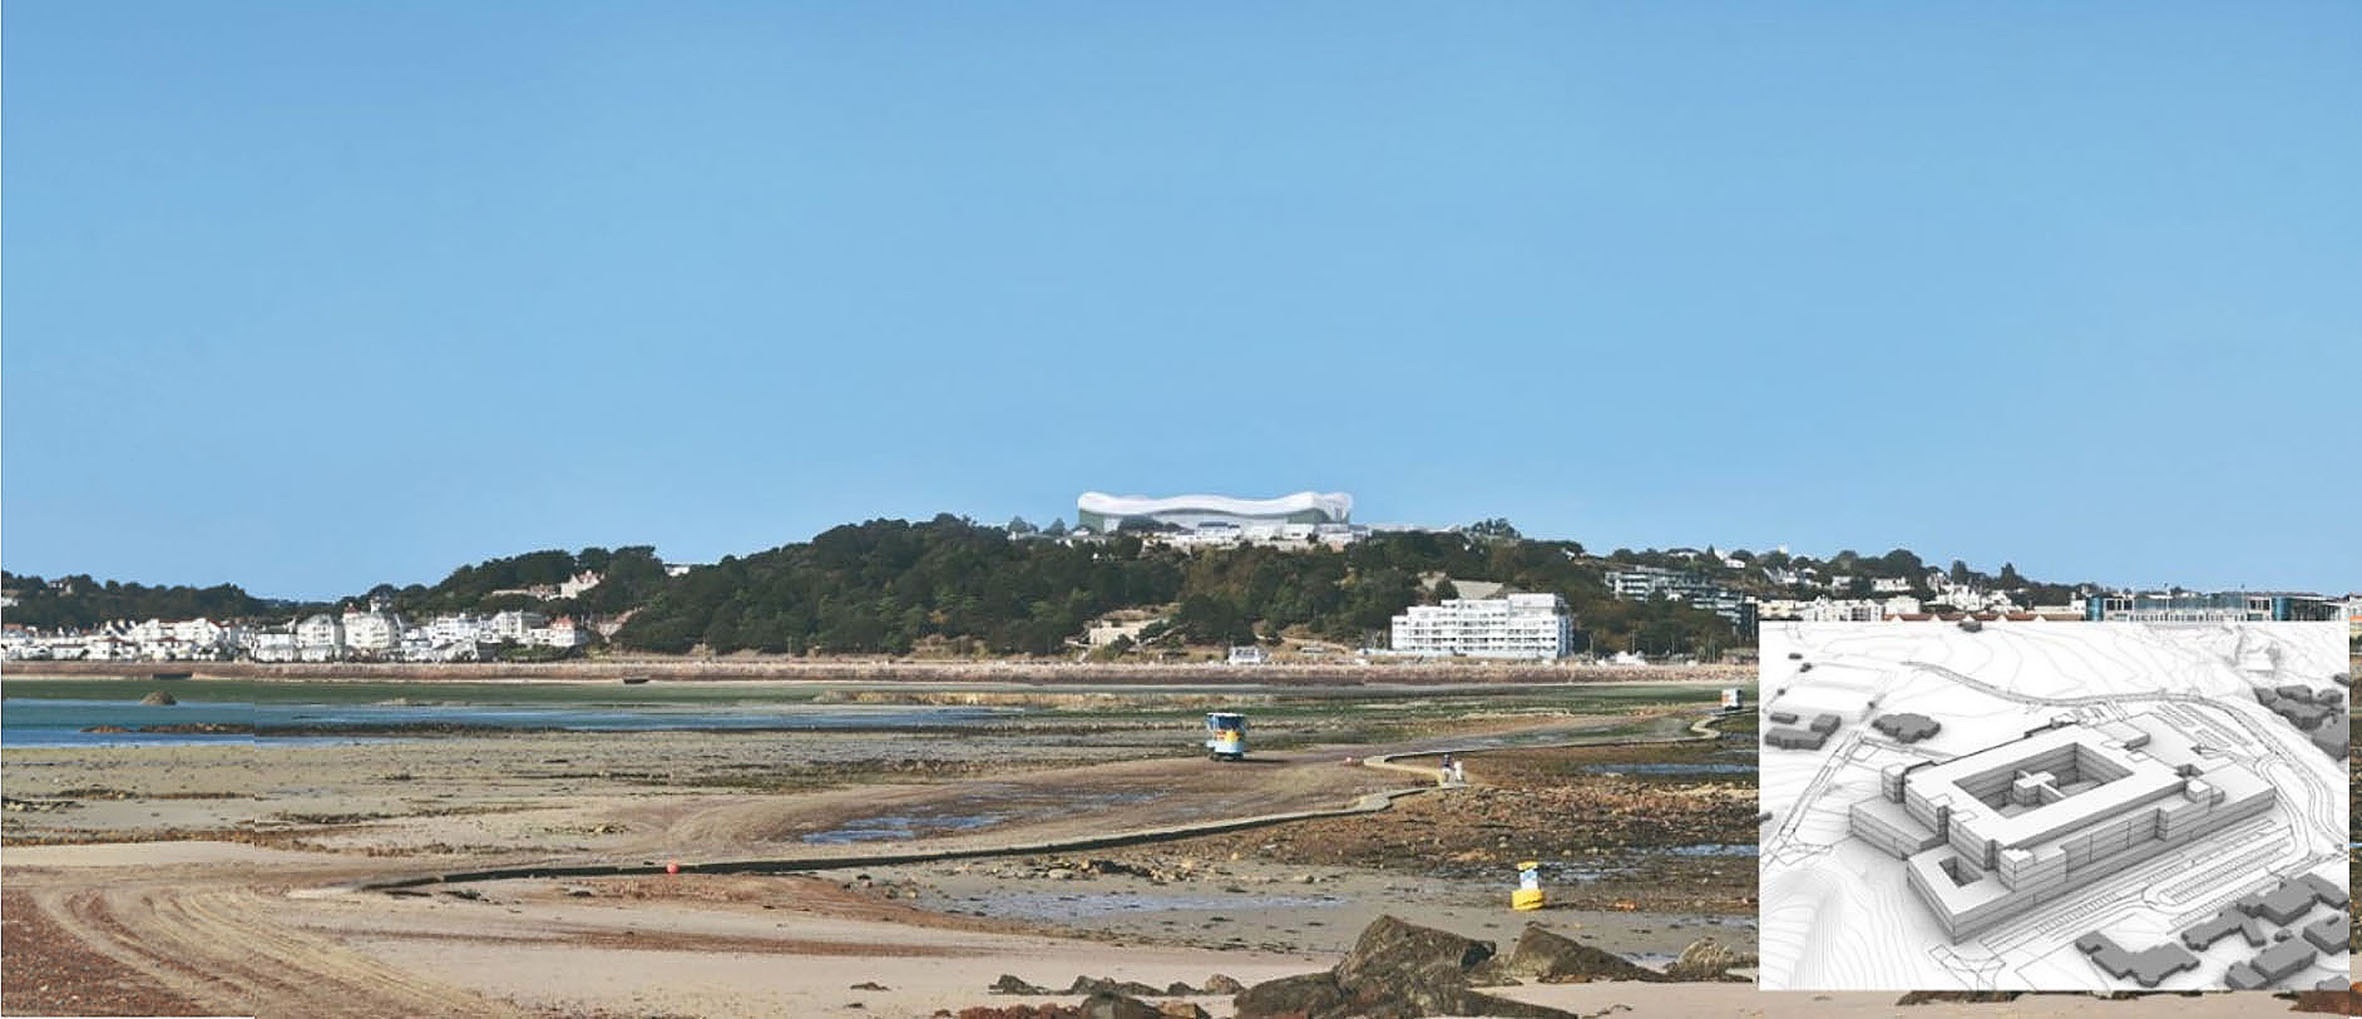 Concept designs for the new hospital. Skyline view from the south. Picture: Government of Jersey (31344509)